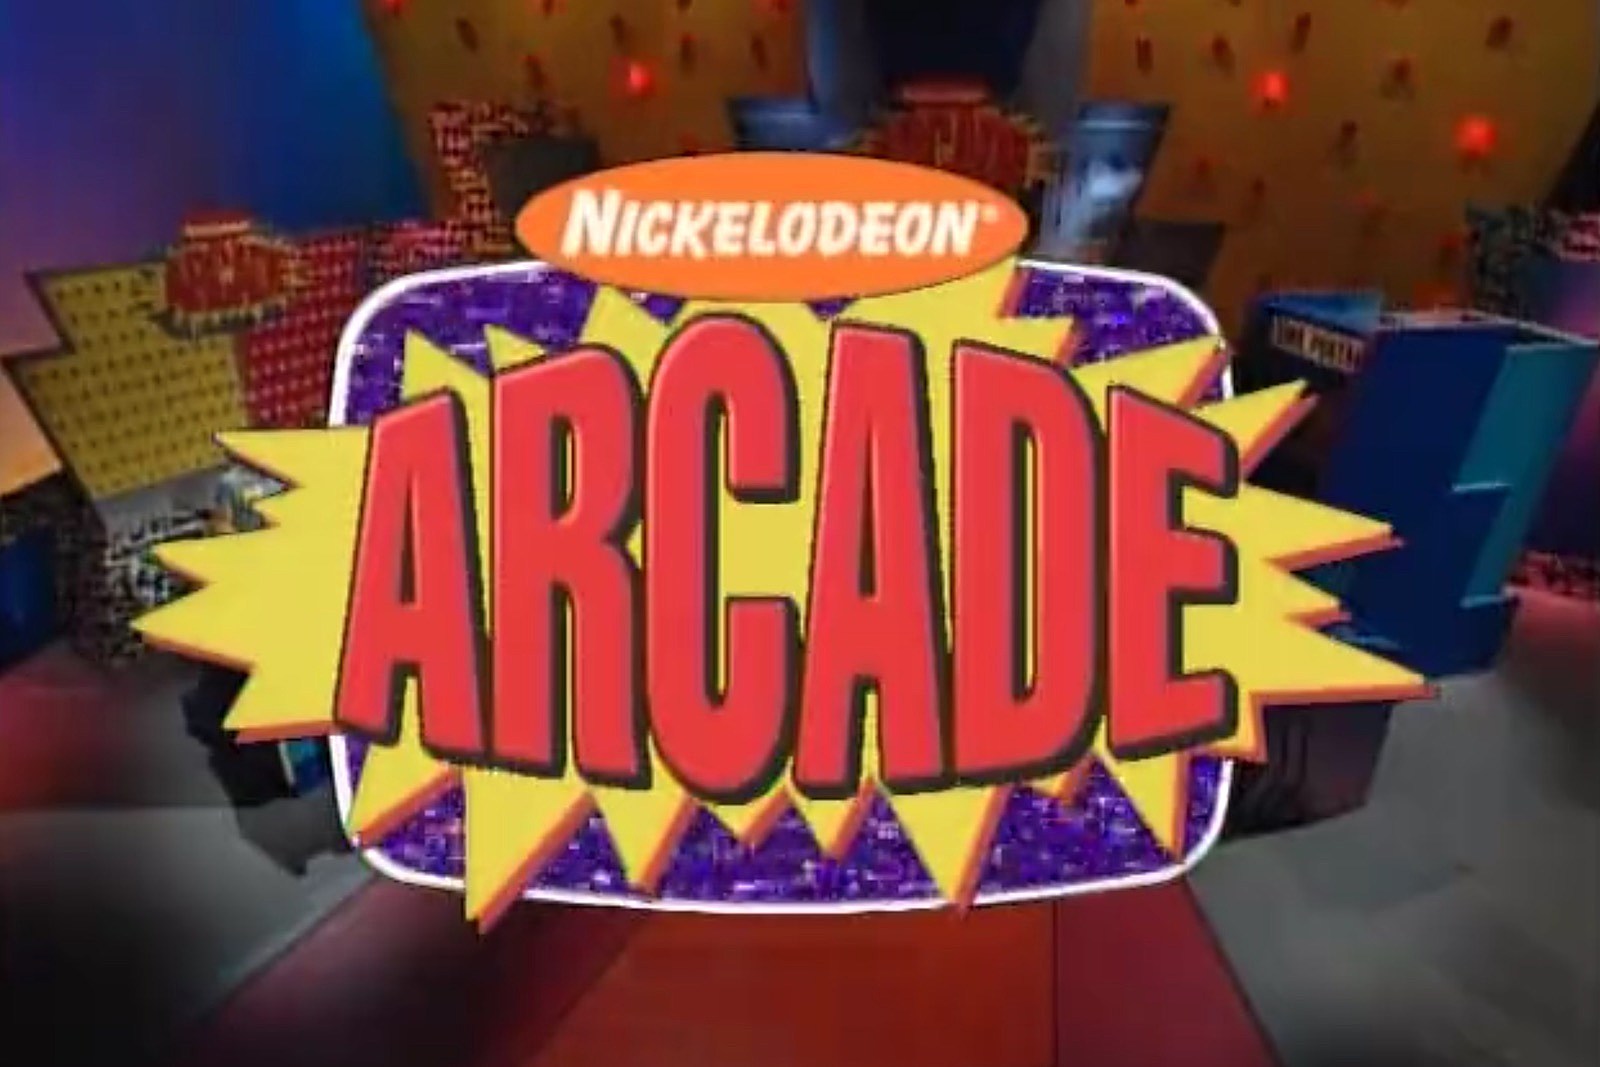 nickelodeon live events